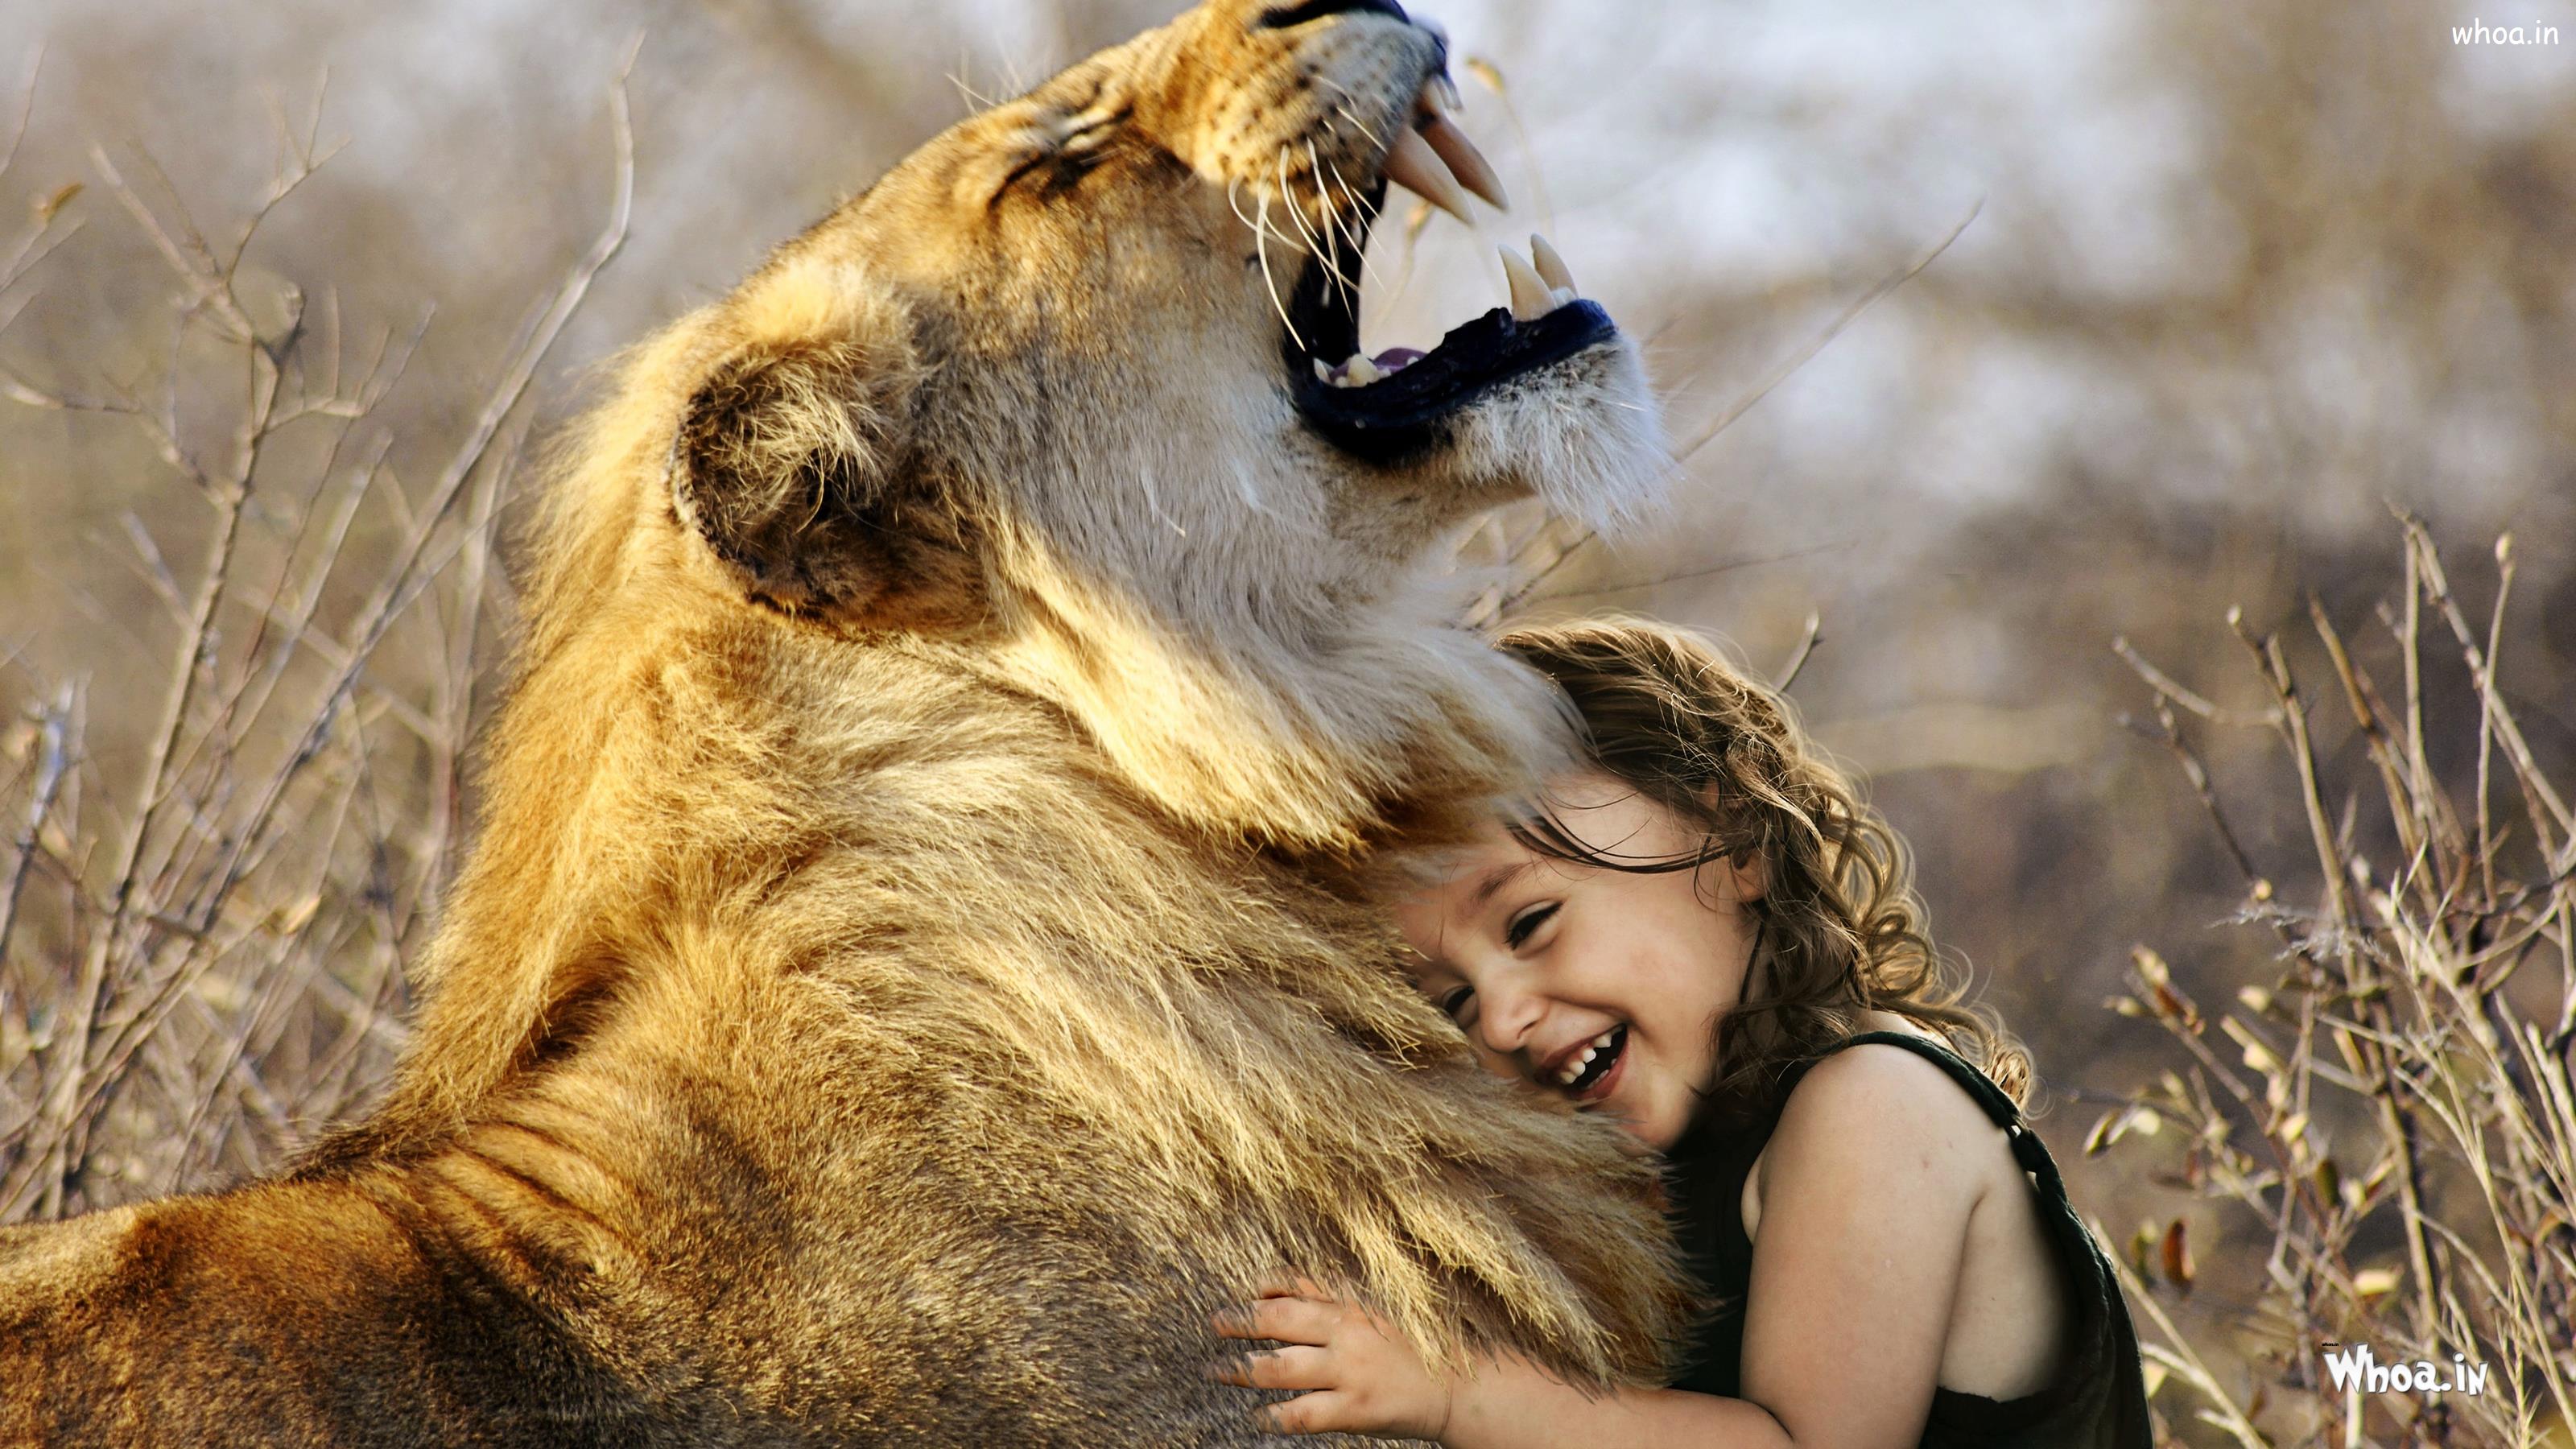 Cute Child Girl Playing With Lion Photoshoot Hd Wallpaper - Cute Girl With Lion - HD Wallpaper 